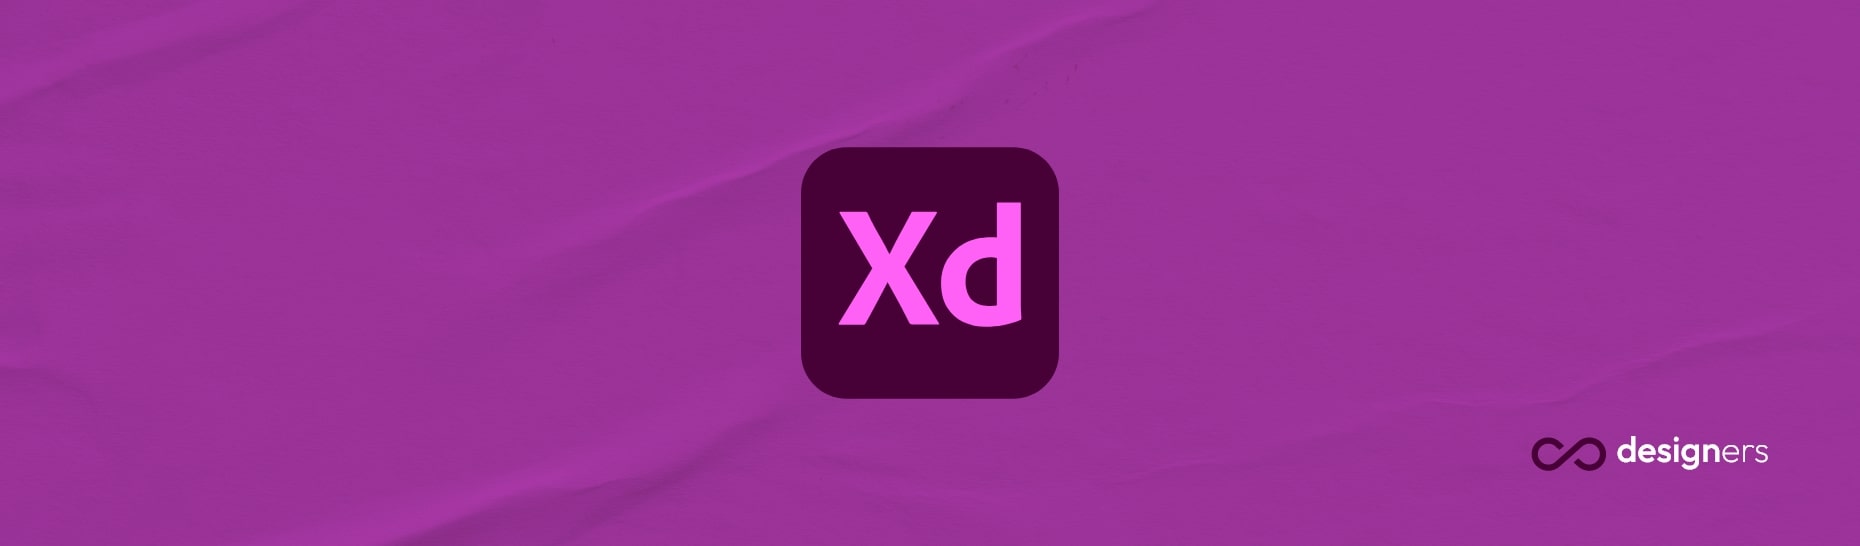 Can I import a website HTML to Adobe XD?